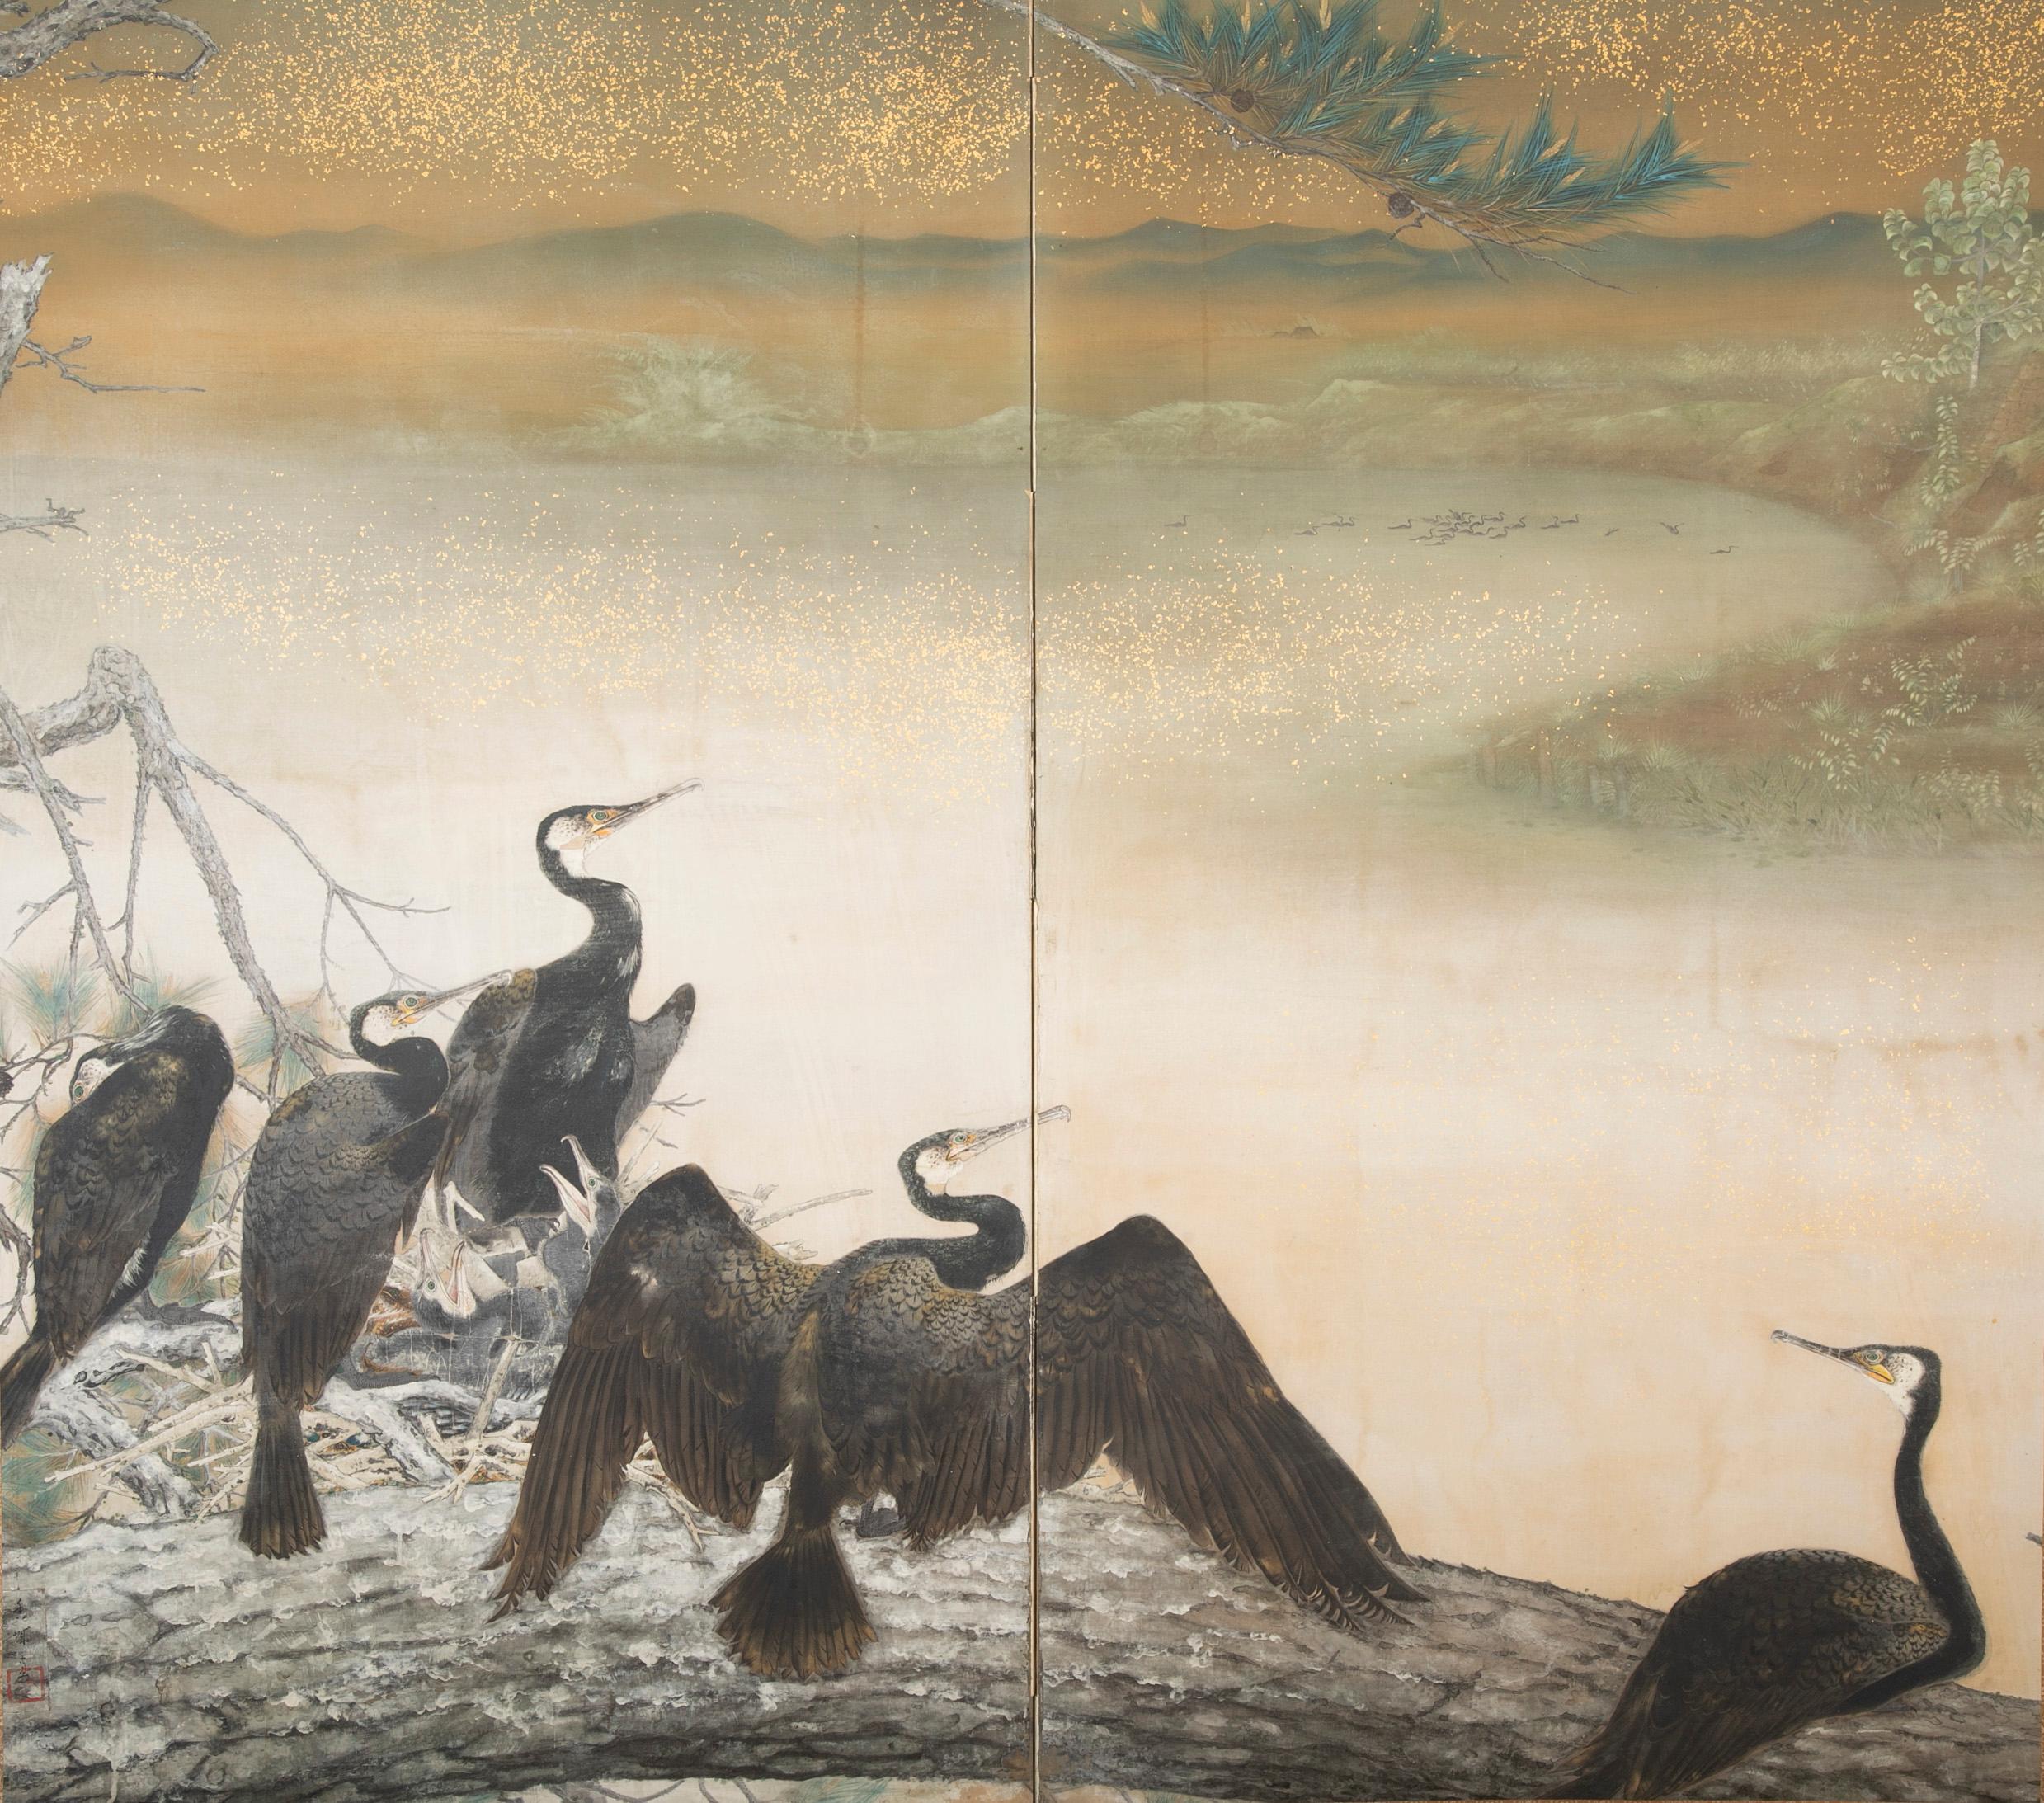 An exquisite Taisho period screen depicting nesting cormorants painted on raw silk with gold fleck by Japanese artist Asami Joujou (b. 1890 in Himeiji, Japan-d. 1974), circa 1912-1926.